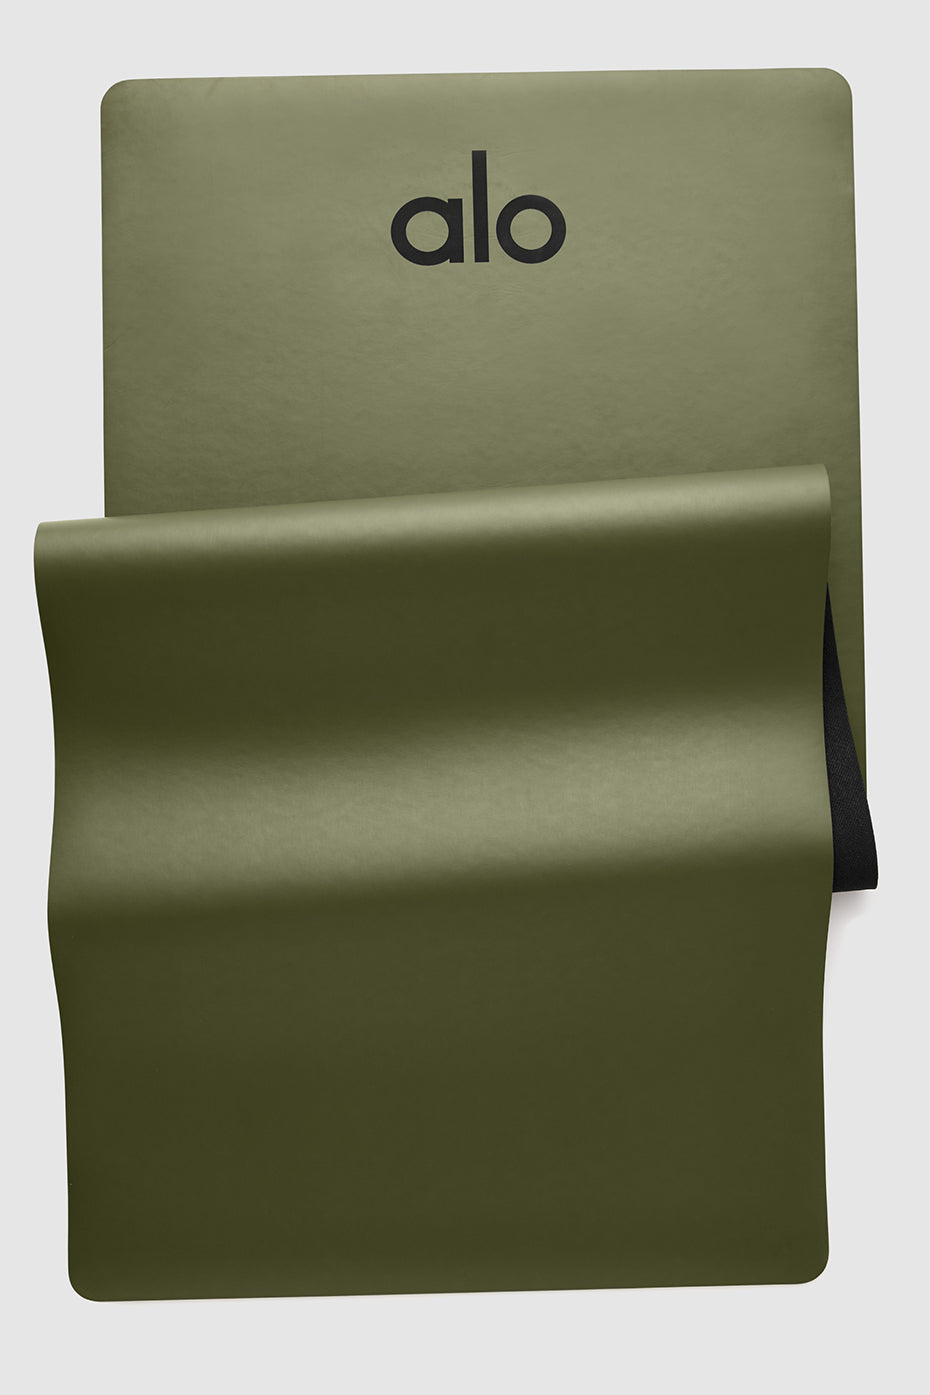 Alo Warrior Yoga Mat- brand new - Sports & Outdoors - Chicago